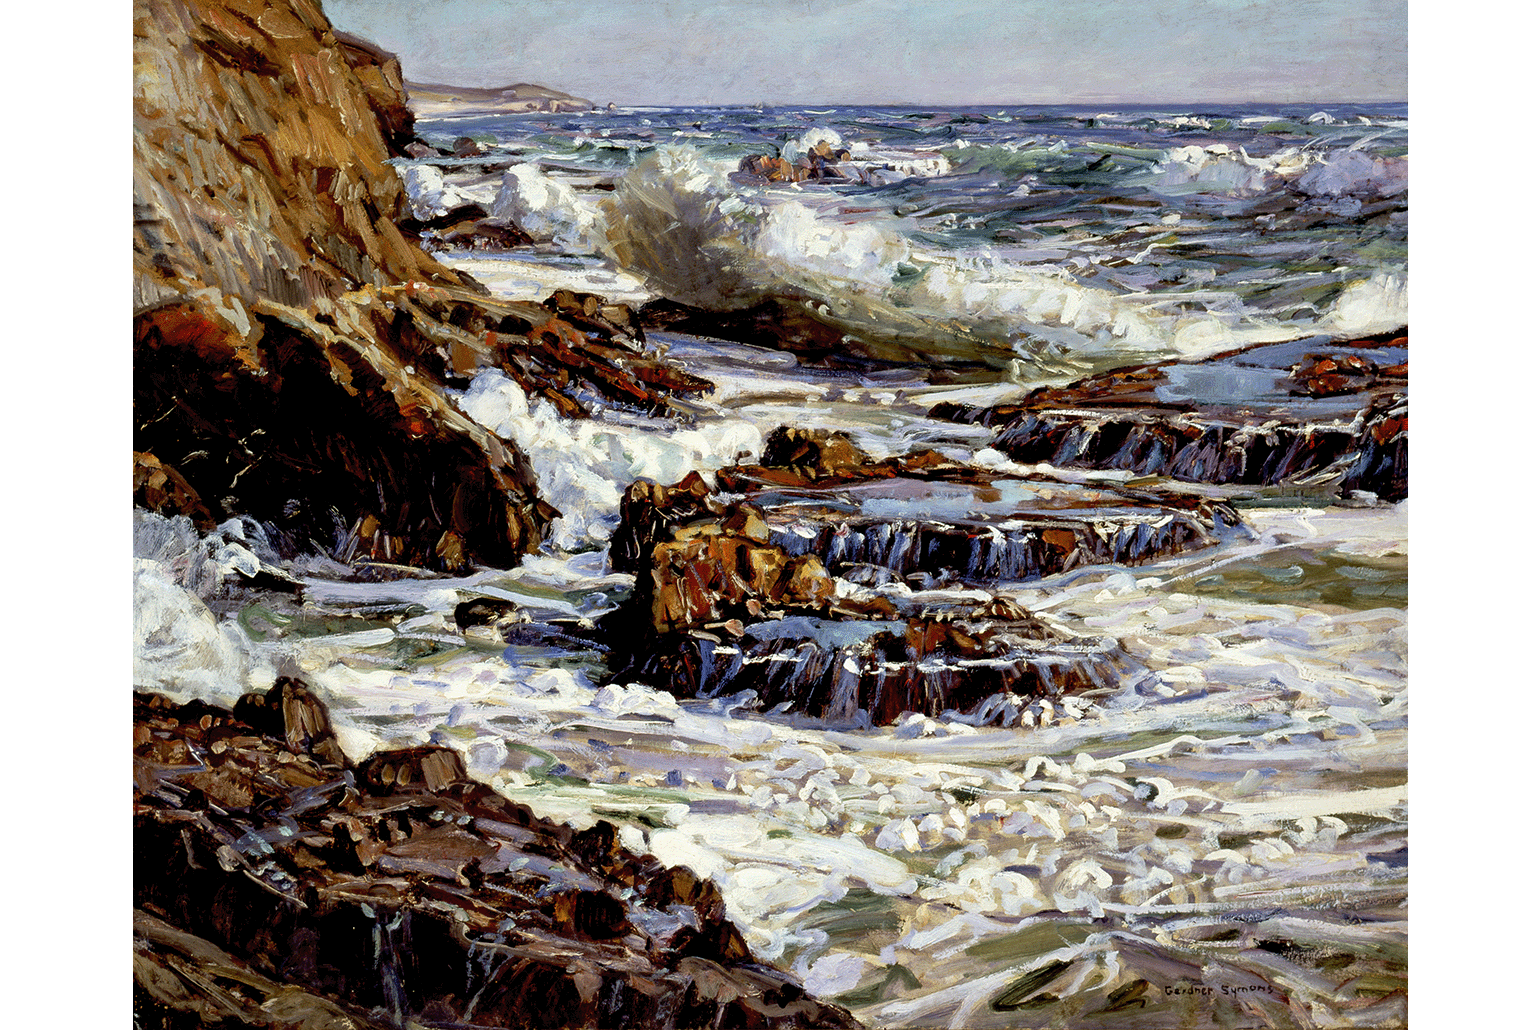 George Gardner Symons, Southern California Coast, before 1913, Oil on canvas, 40 x 50 in. UCI Jack and Shanaz Langson Institute and Museum of California Art, Gift of The Irvine Museum